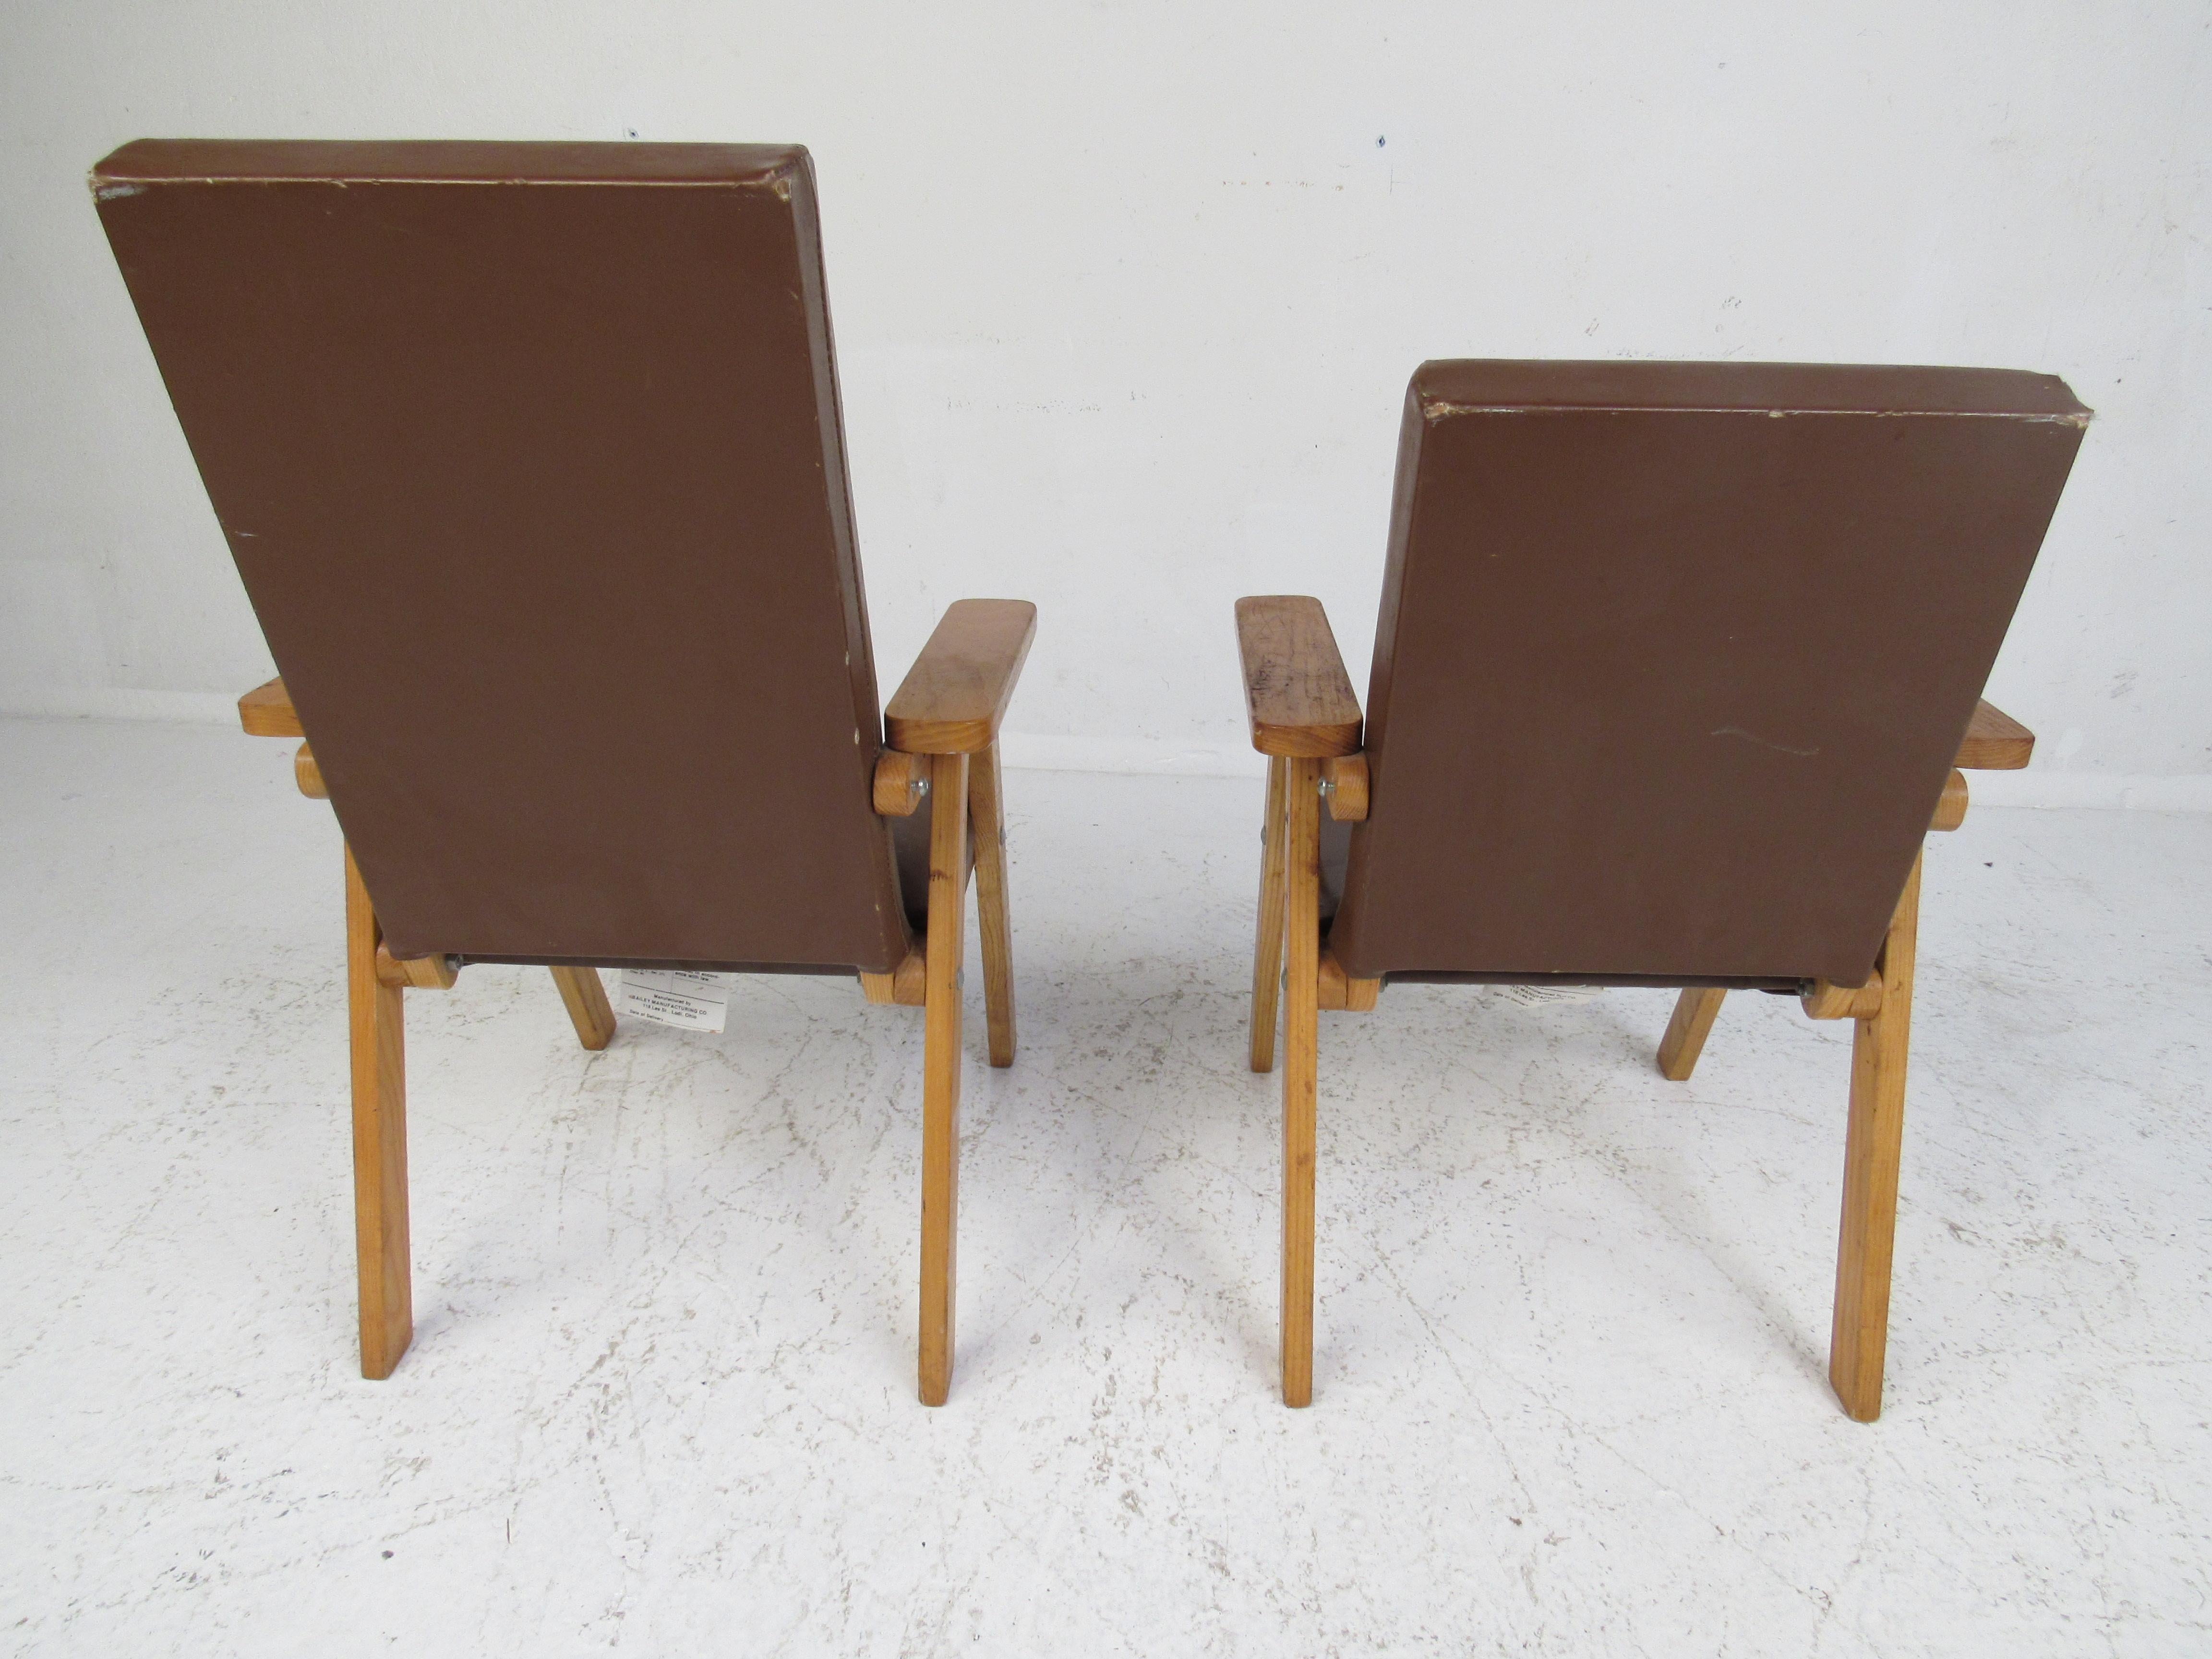 Pair of Small Vintage Modern Lounge Chairs In Good Condition For Sale In Brooklyn, NY